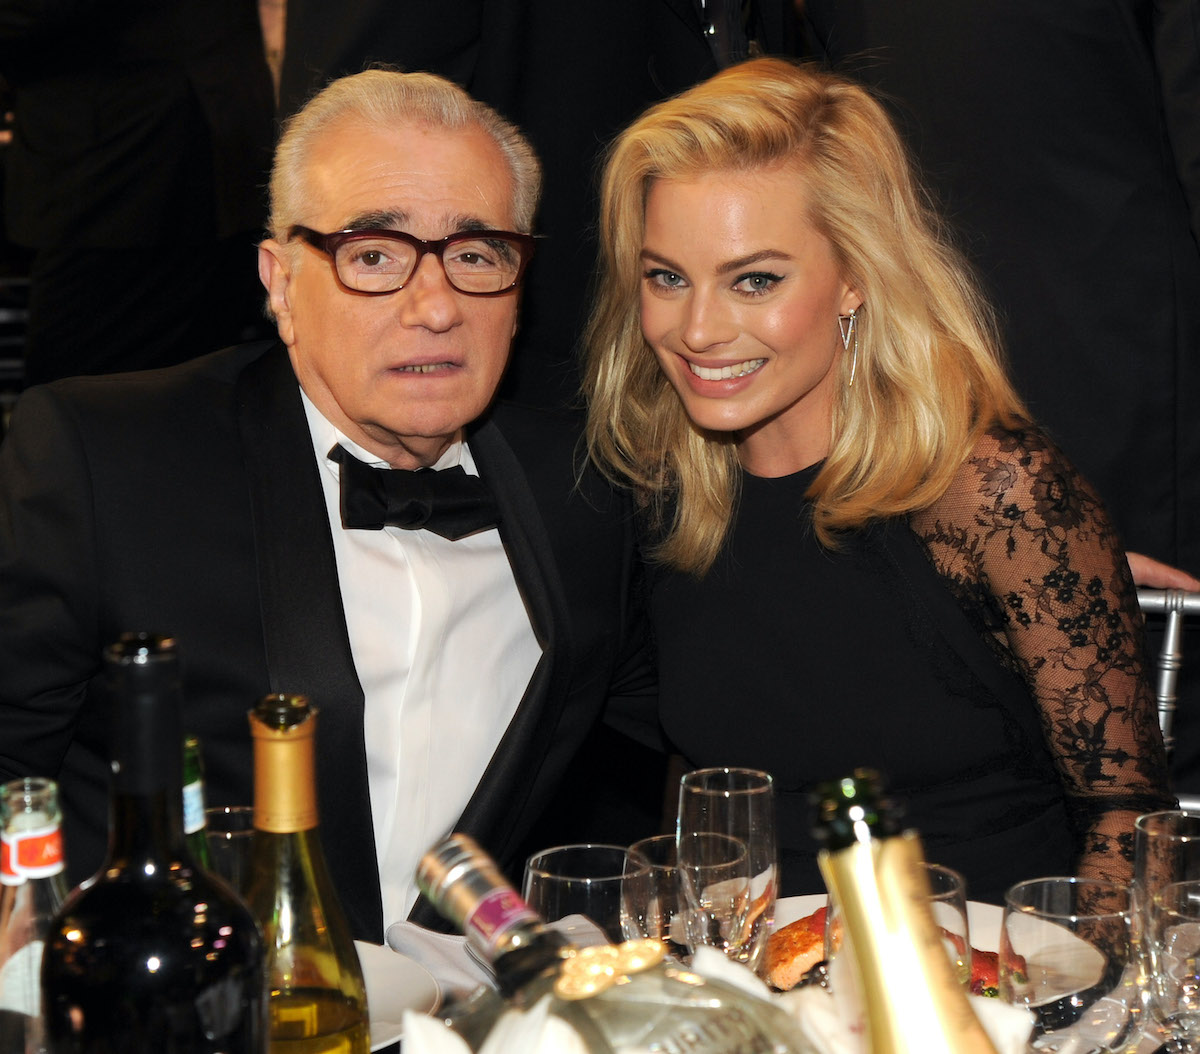 Martin Scorsese and Margot Robbie dressed in black at a dinner table